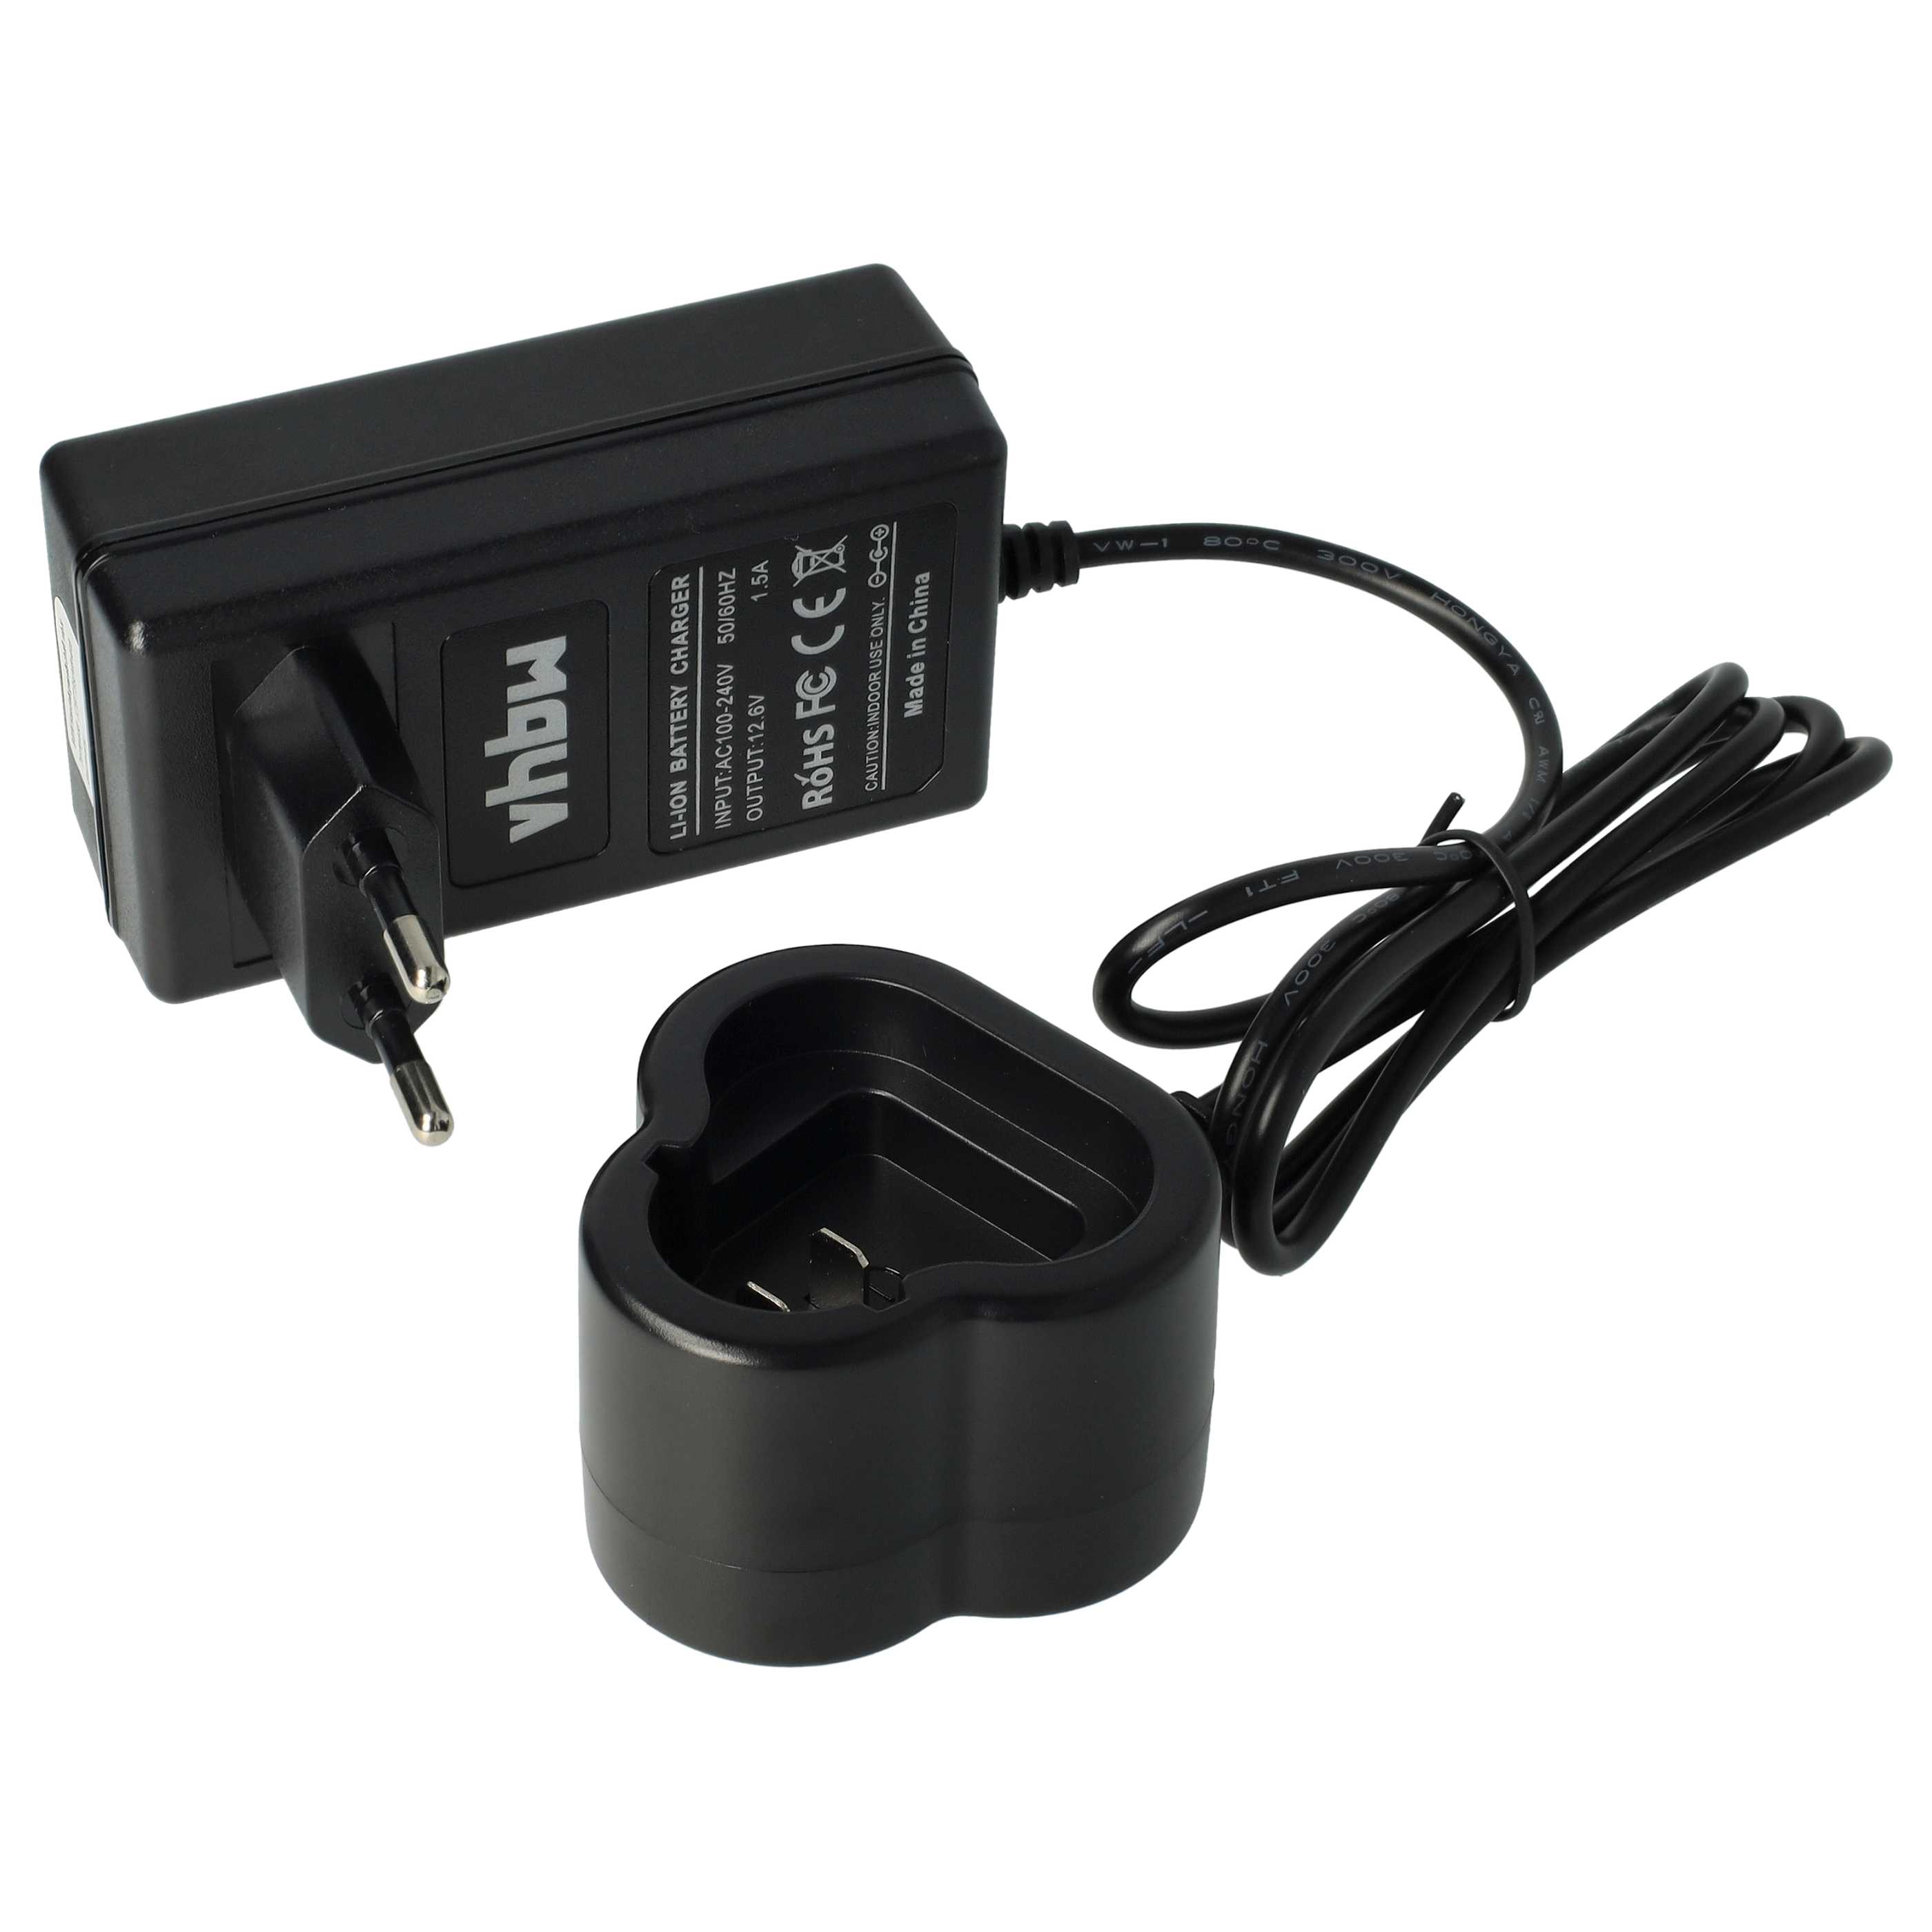 Charger suitable for 6.254.38 , Mafell, Metabo 6.254.38 Power Tool Batteries etc. Li-Ion 10.8 V